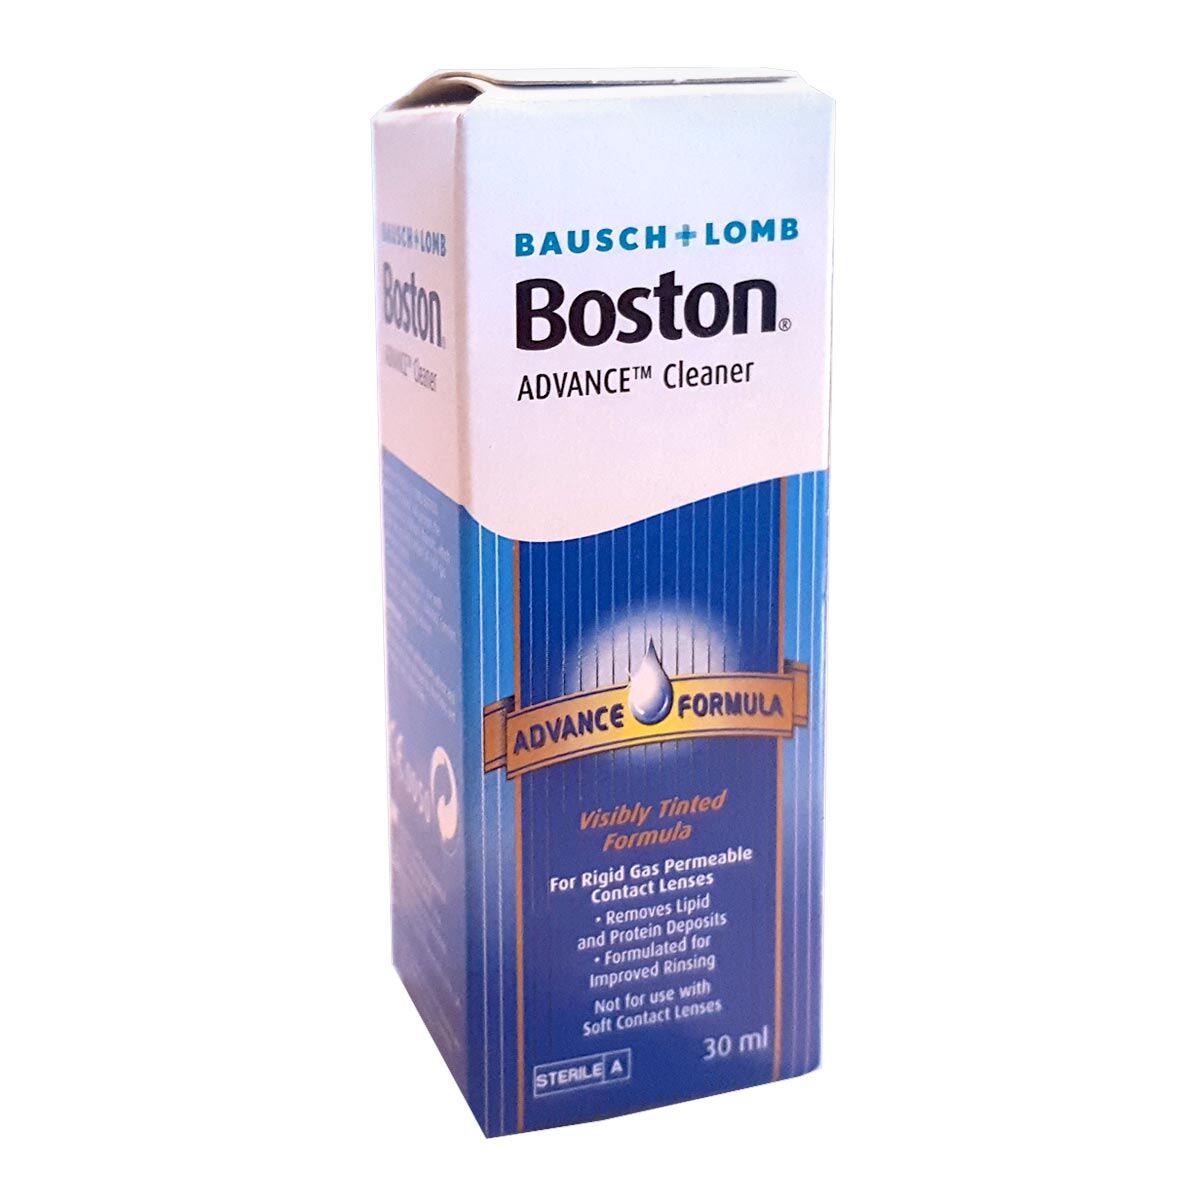 Bausch & Lomb Boston Cleaner (30ml), Contact Lens Solution, For Use With Hard & Gas Permeable Lenses, Includes Case